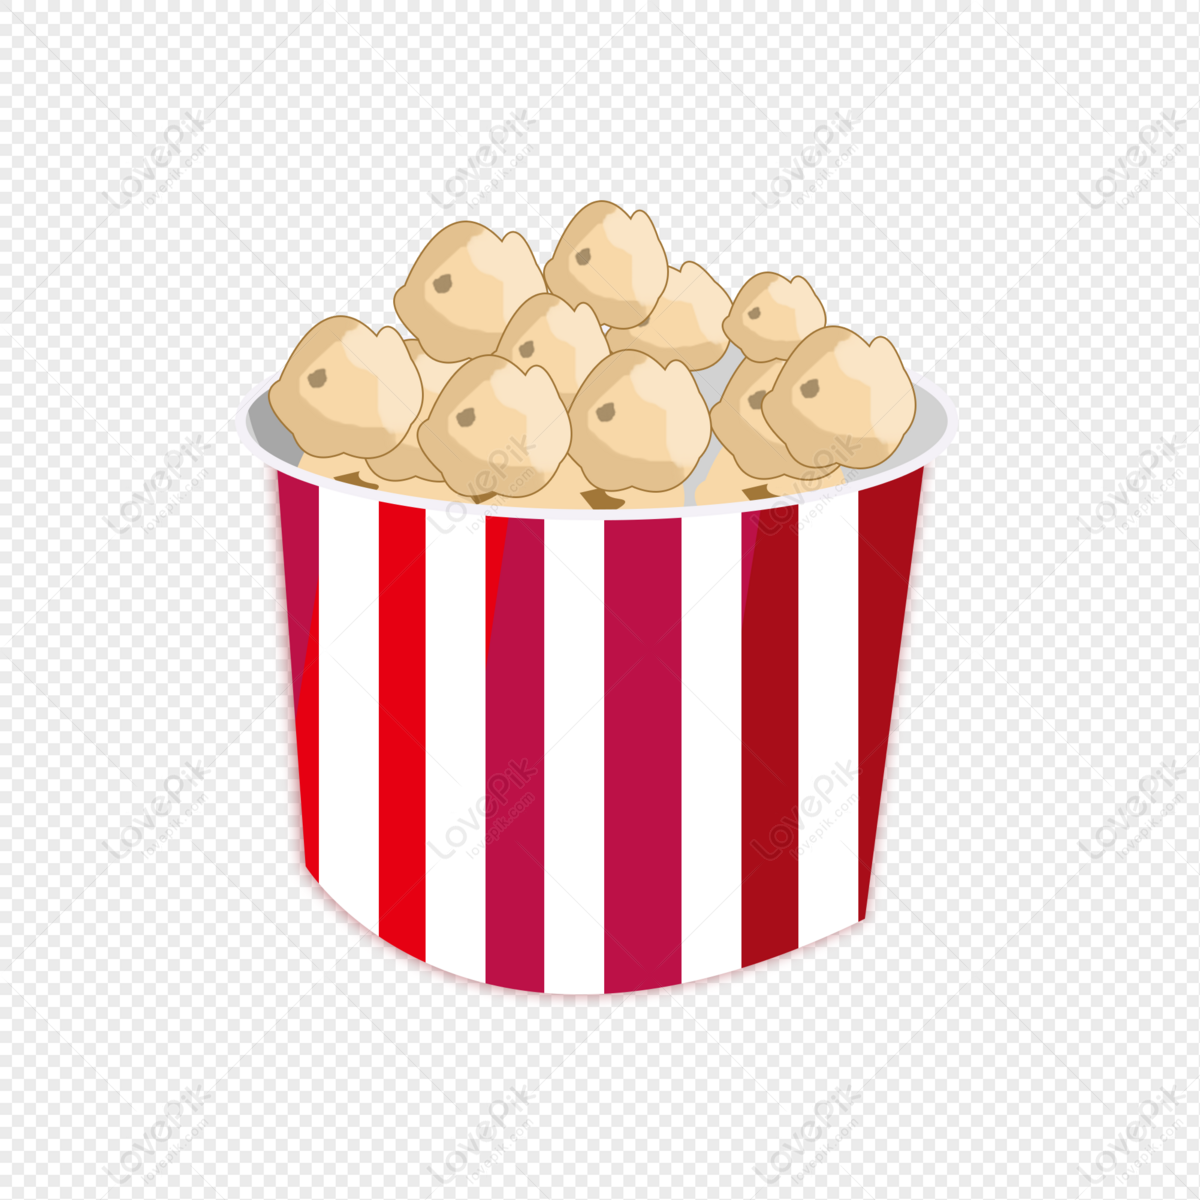 Watch the movie must-have popcorn hand-painted cartoon material, material, movie material, couple png transparent image